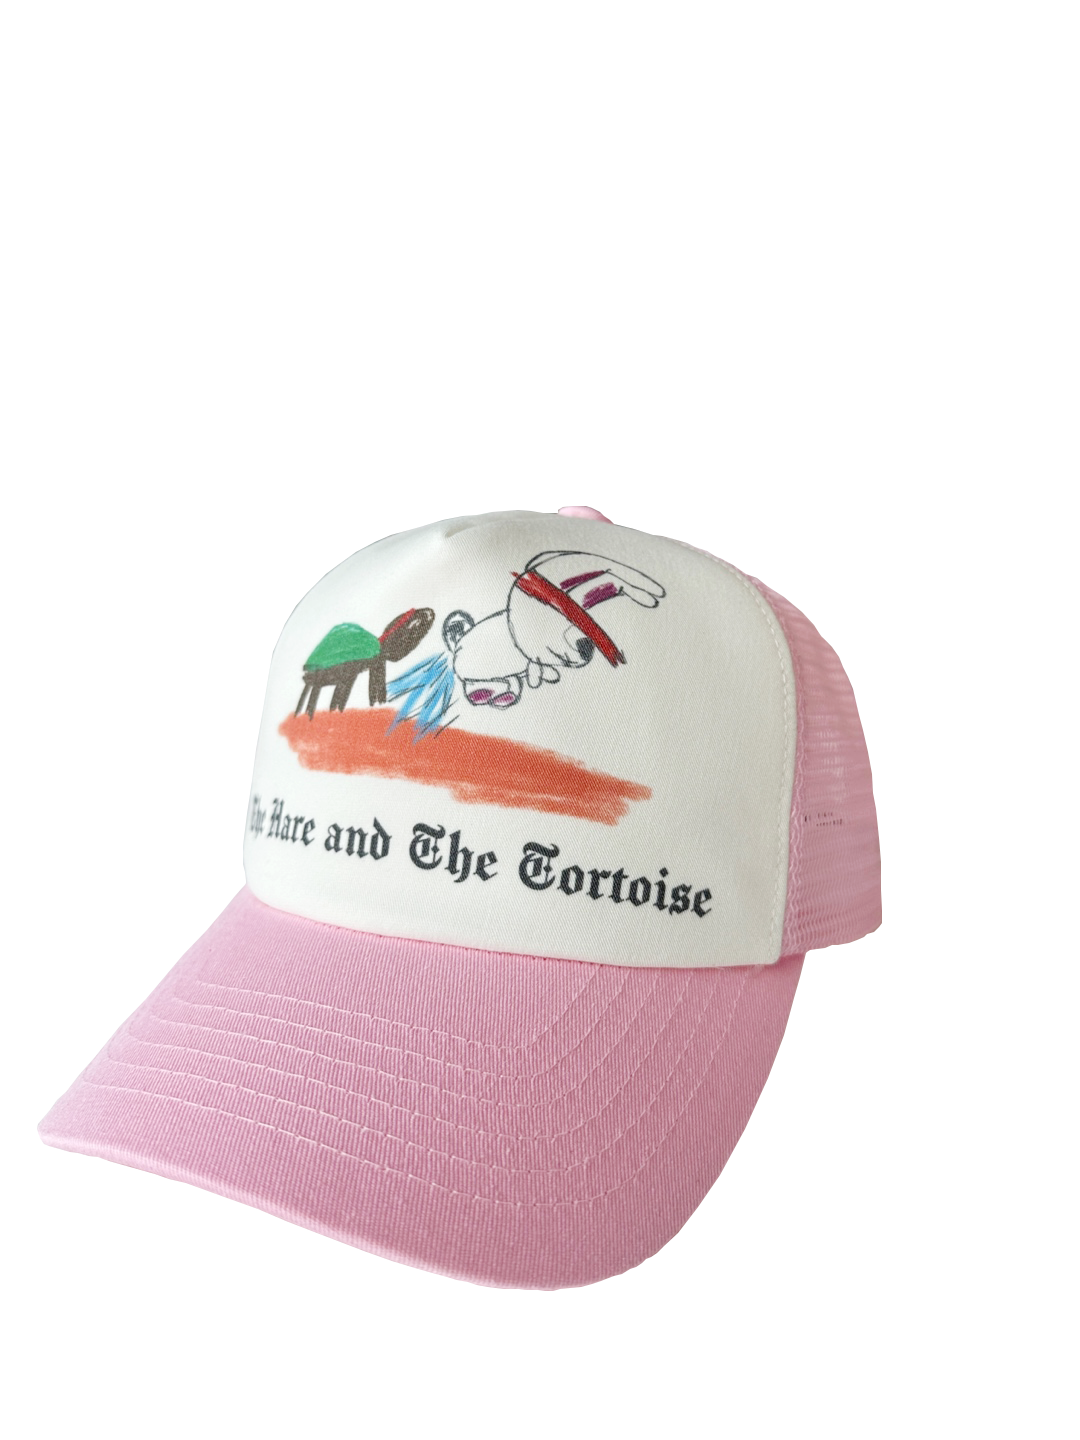 The Hare and Tortoise Trucker Cap Pink